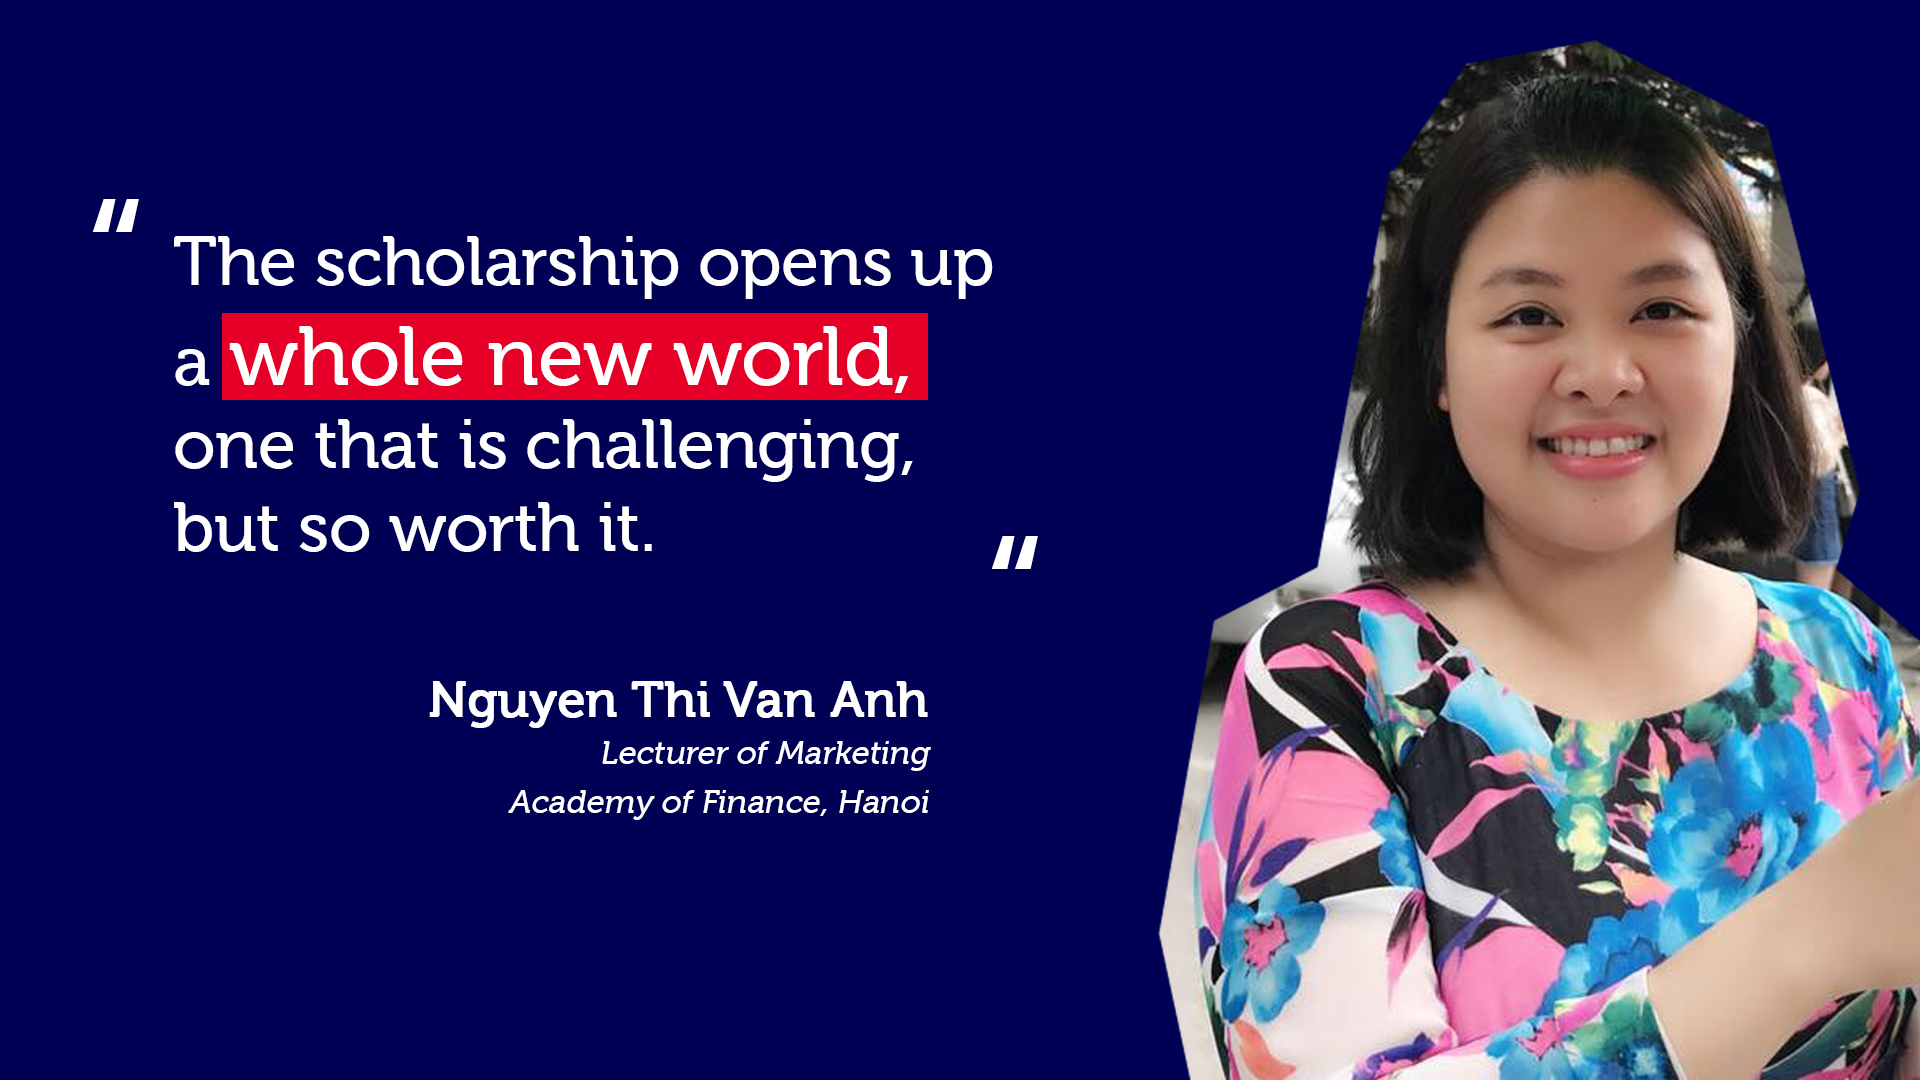 Lecturer of Marketing at the Academy of Finance, Hanoi “The scholarship opens up a whole new world, one that is challenging, but so worth it.”